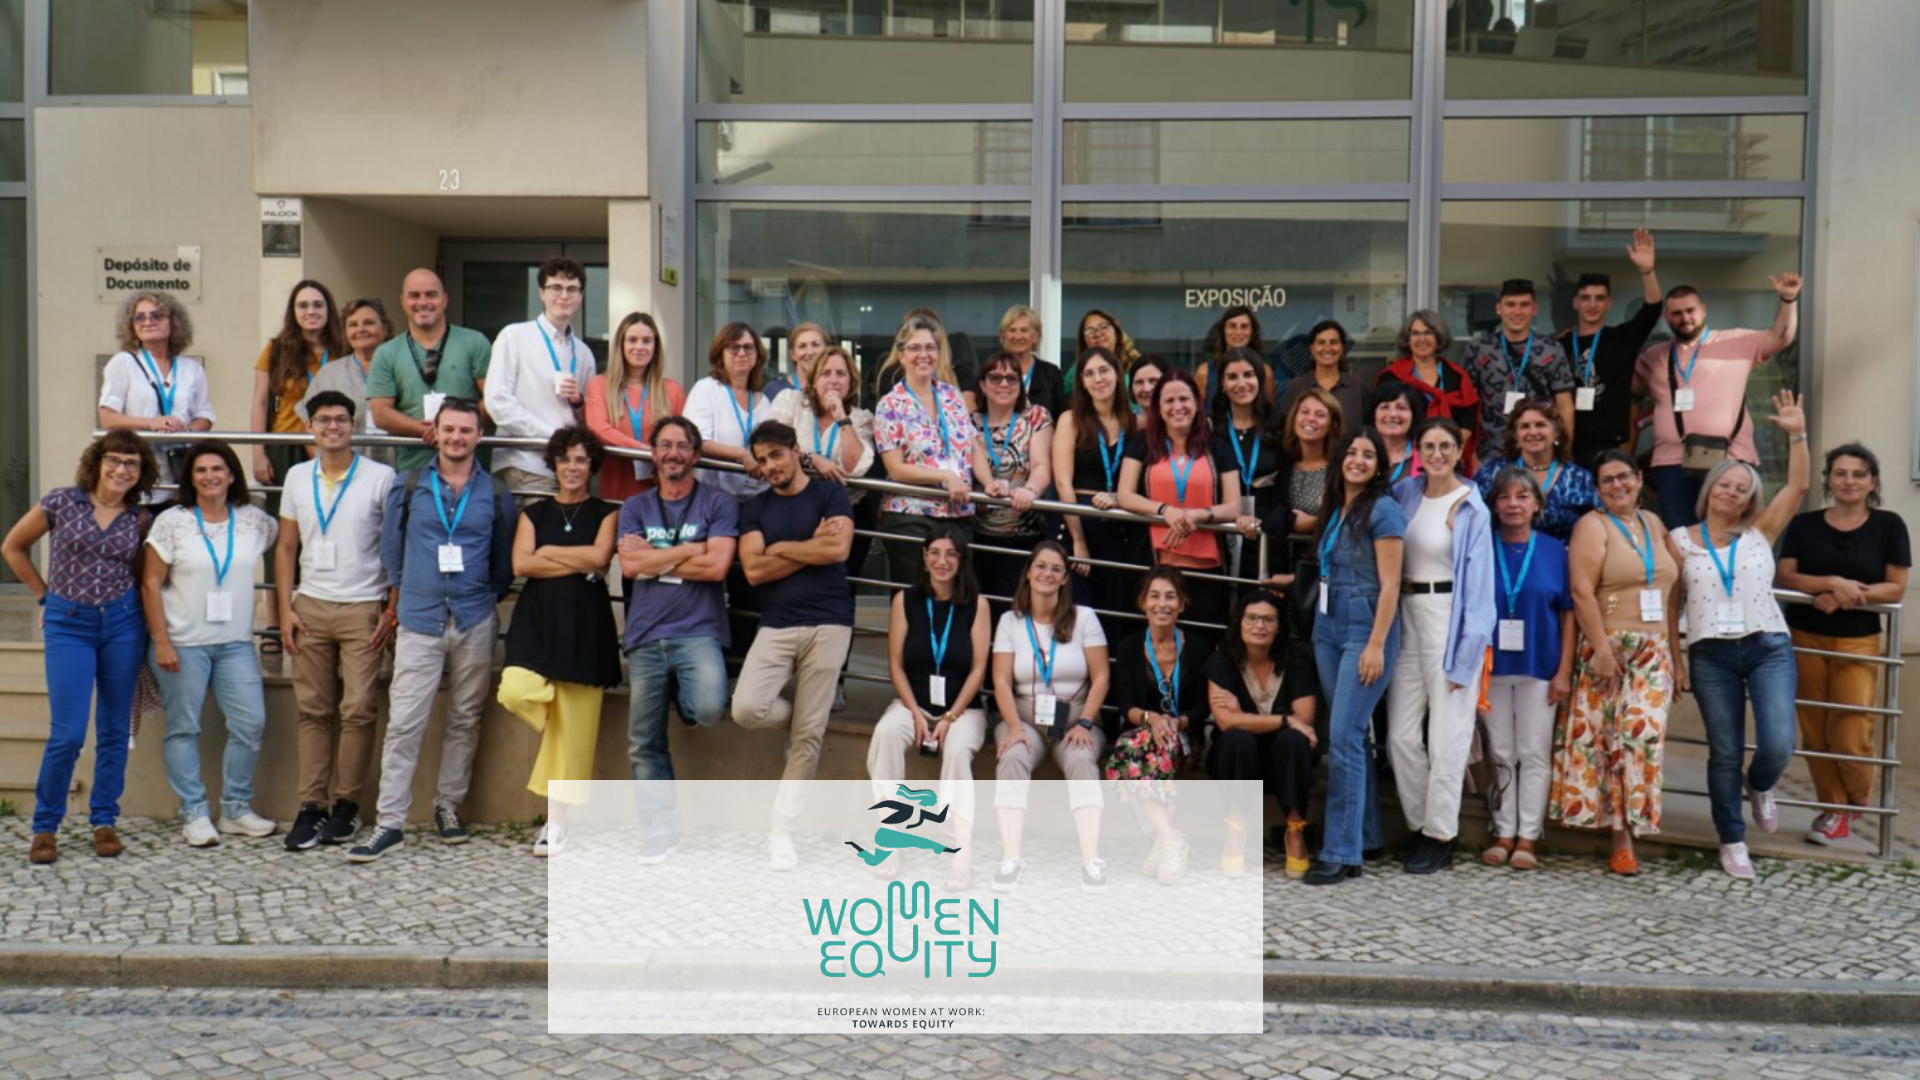 Finnova engaged in the second activity of the WomenEquity project in Lourinhã